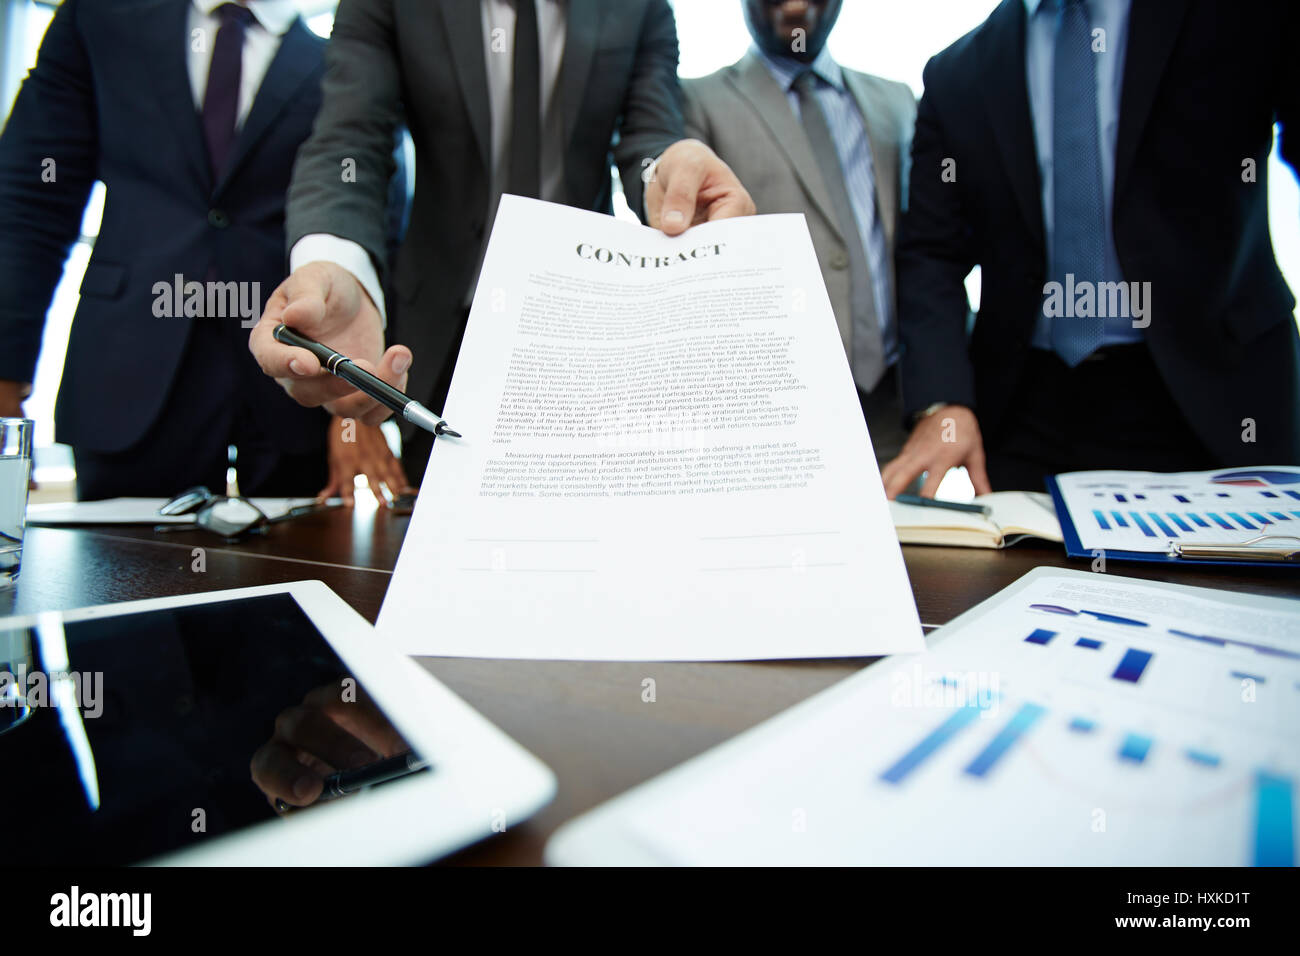 Inducing Business Partner to Sign Contract Stock Photo